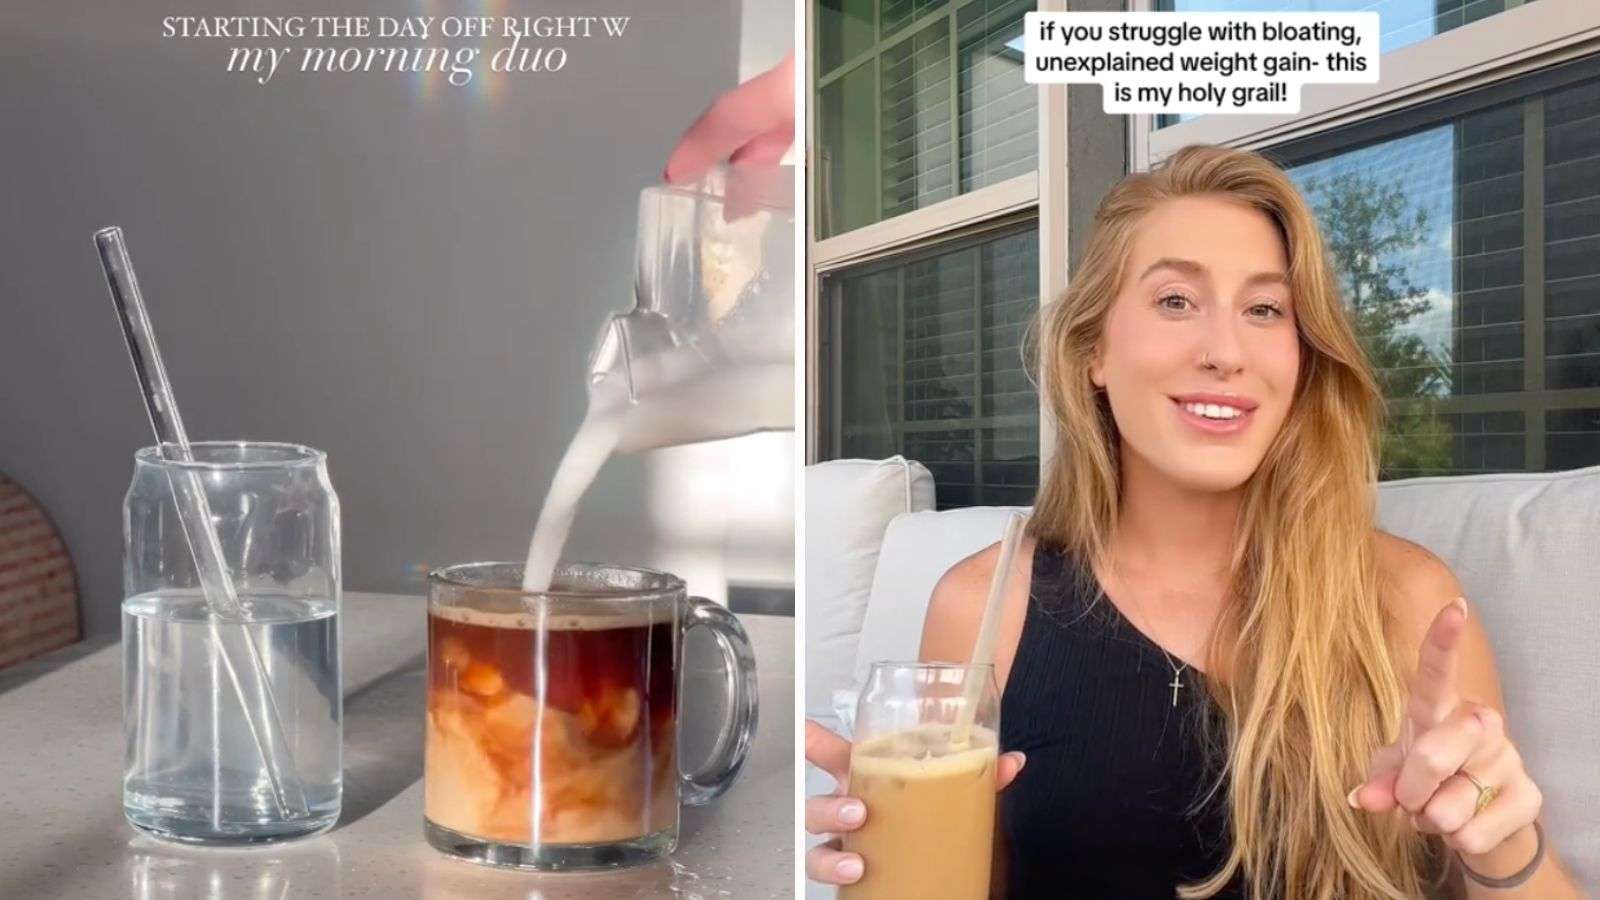 What is the viral Morning Duo drink on TikTok?